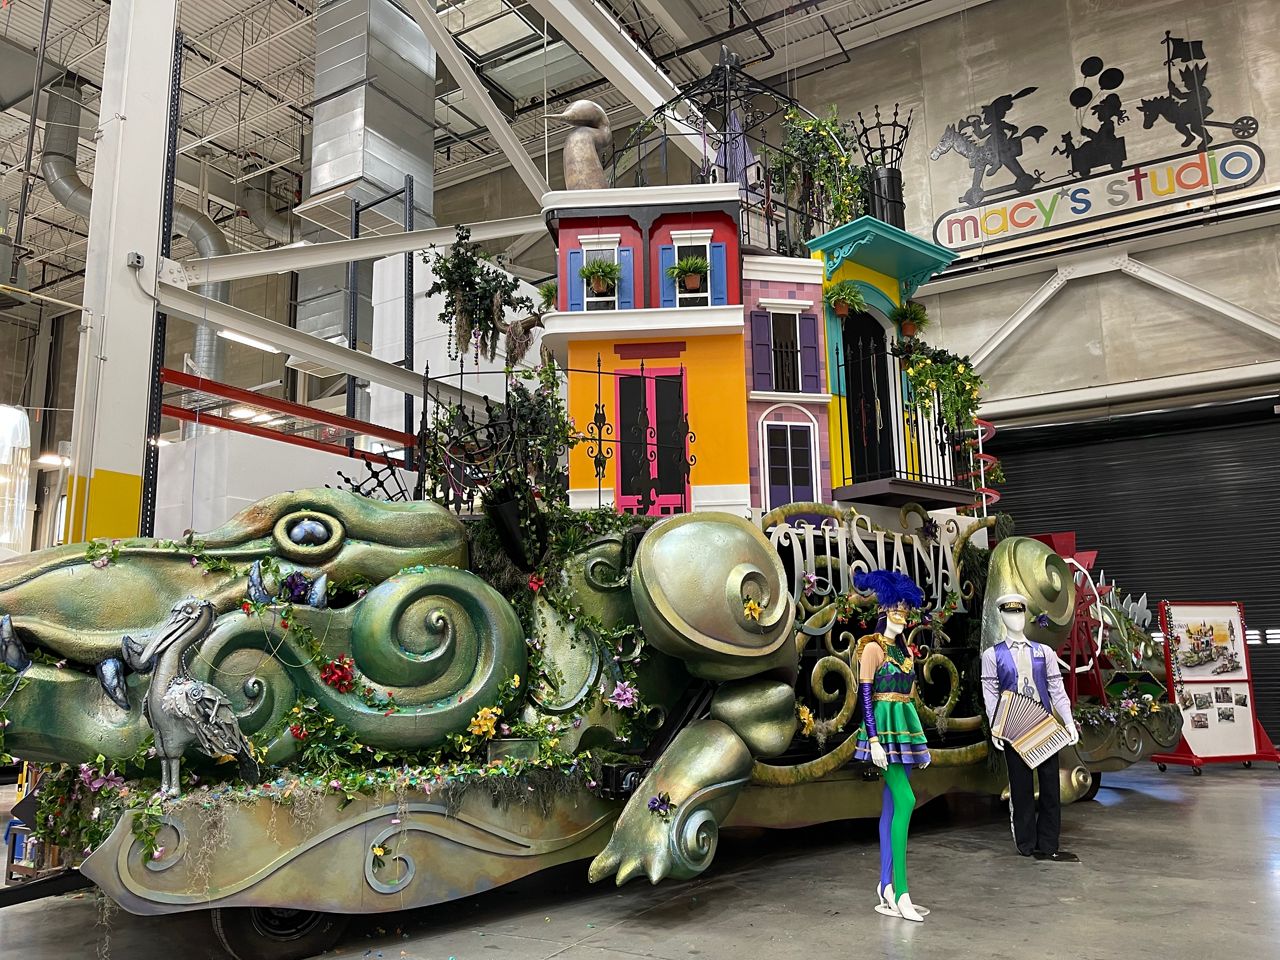 Macy’s unveils 6 new floats for Thanksgiving Day Parade